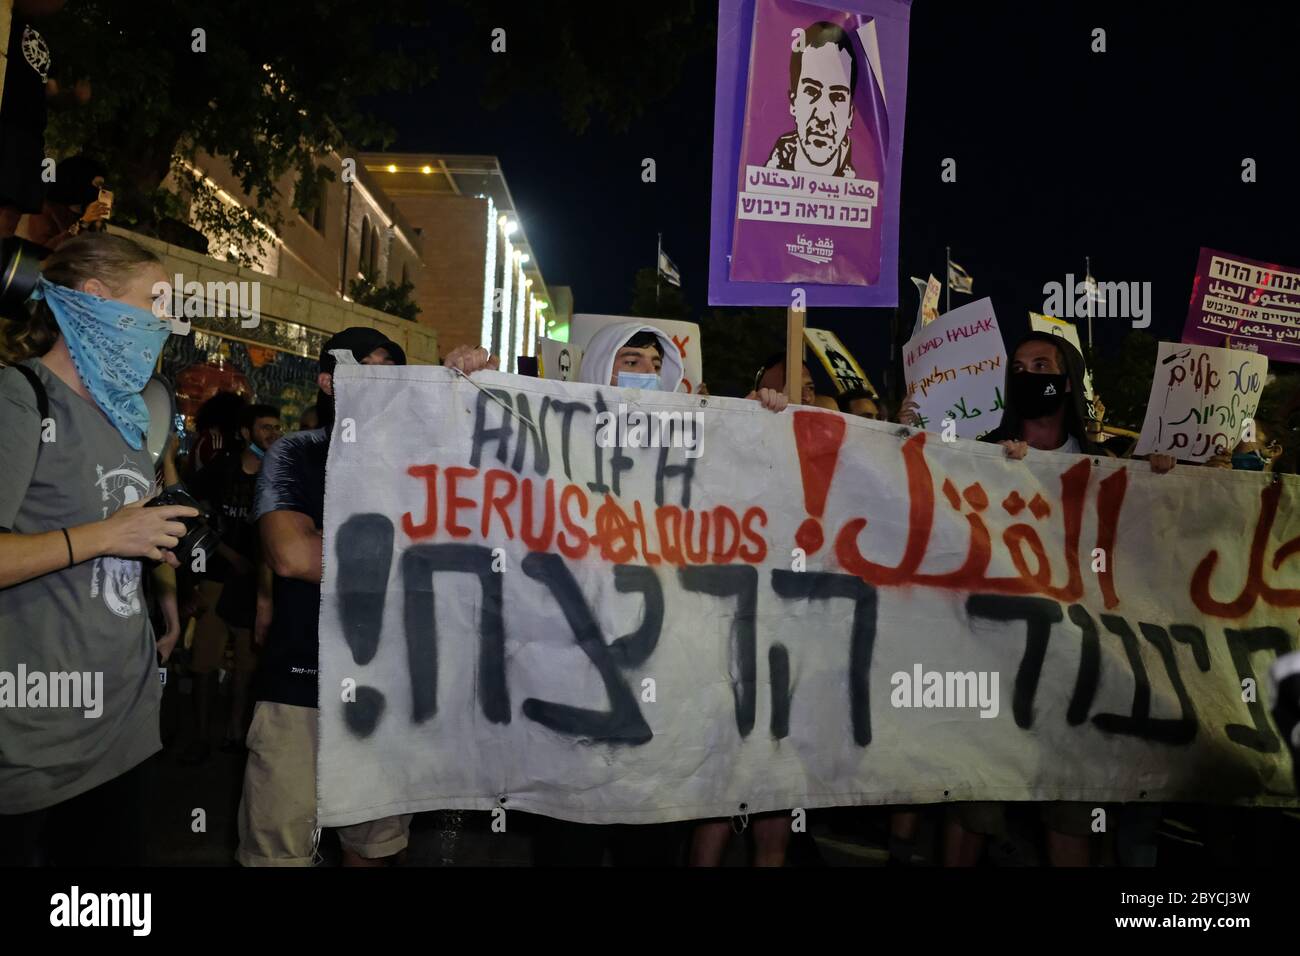 Jerusalem, Israel. 9th June, 2020. Left-wing activists attending a protest in Jerusalem on June 9, 2020 against the killing of Iyad Hallak, a disabled Palestinian man shot dead by Israeli police as well of the killing of unarmed African-American George Floyd. Credit: Eddie Gerald/Alamy Live News Stock Photo